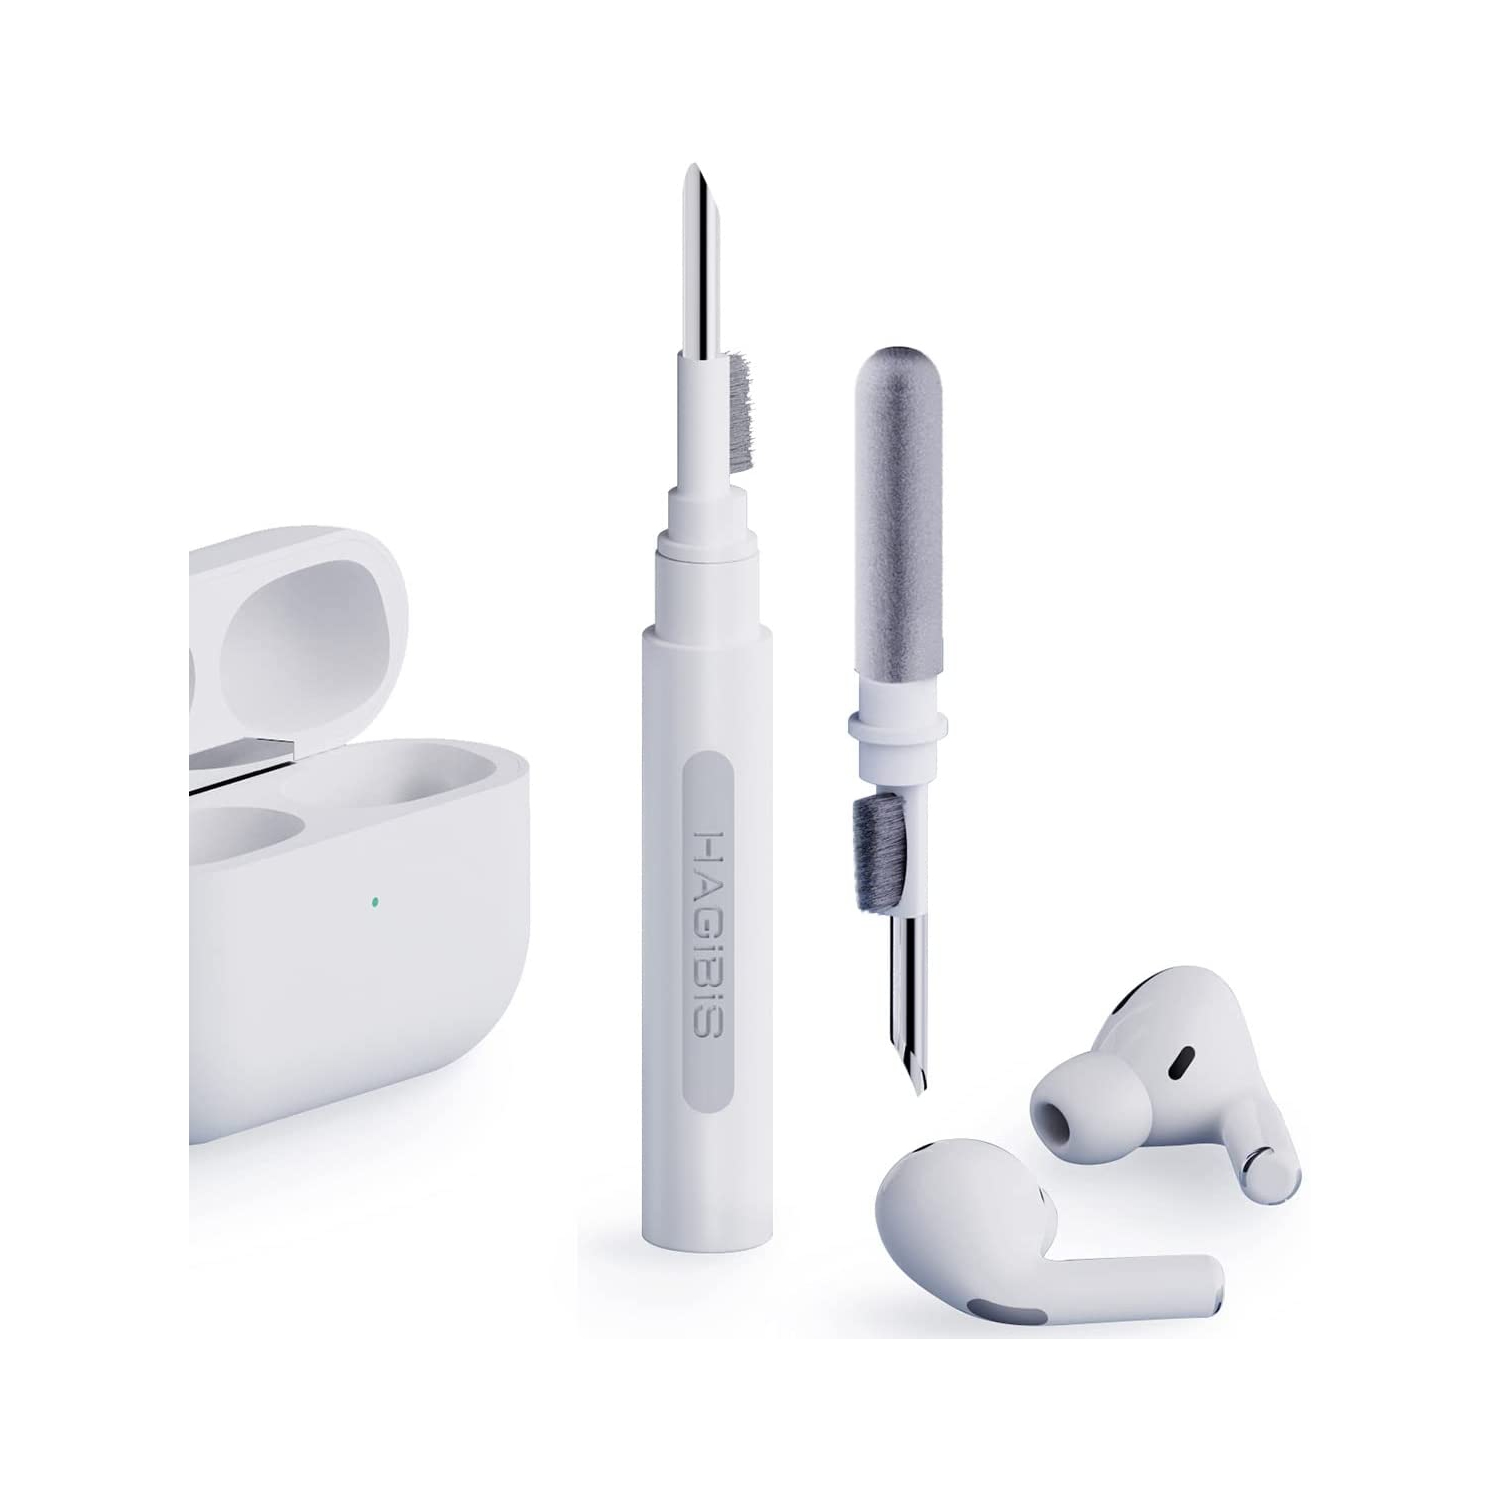 Hagibis Cleaning Pen for Airpods| Multi-Function Cleaner Kit| Soft Brush for Bluetooth Earphones Case Cleaning| Huawei Samsung MI Earbuds (White)